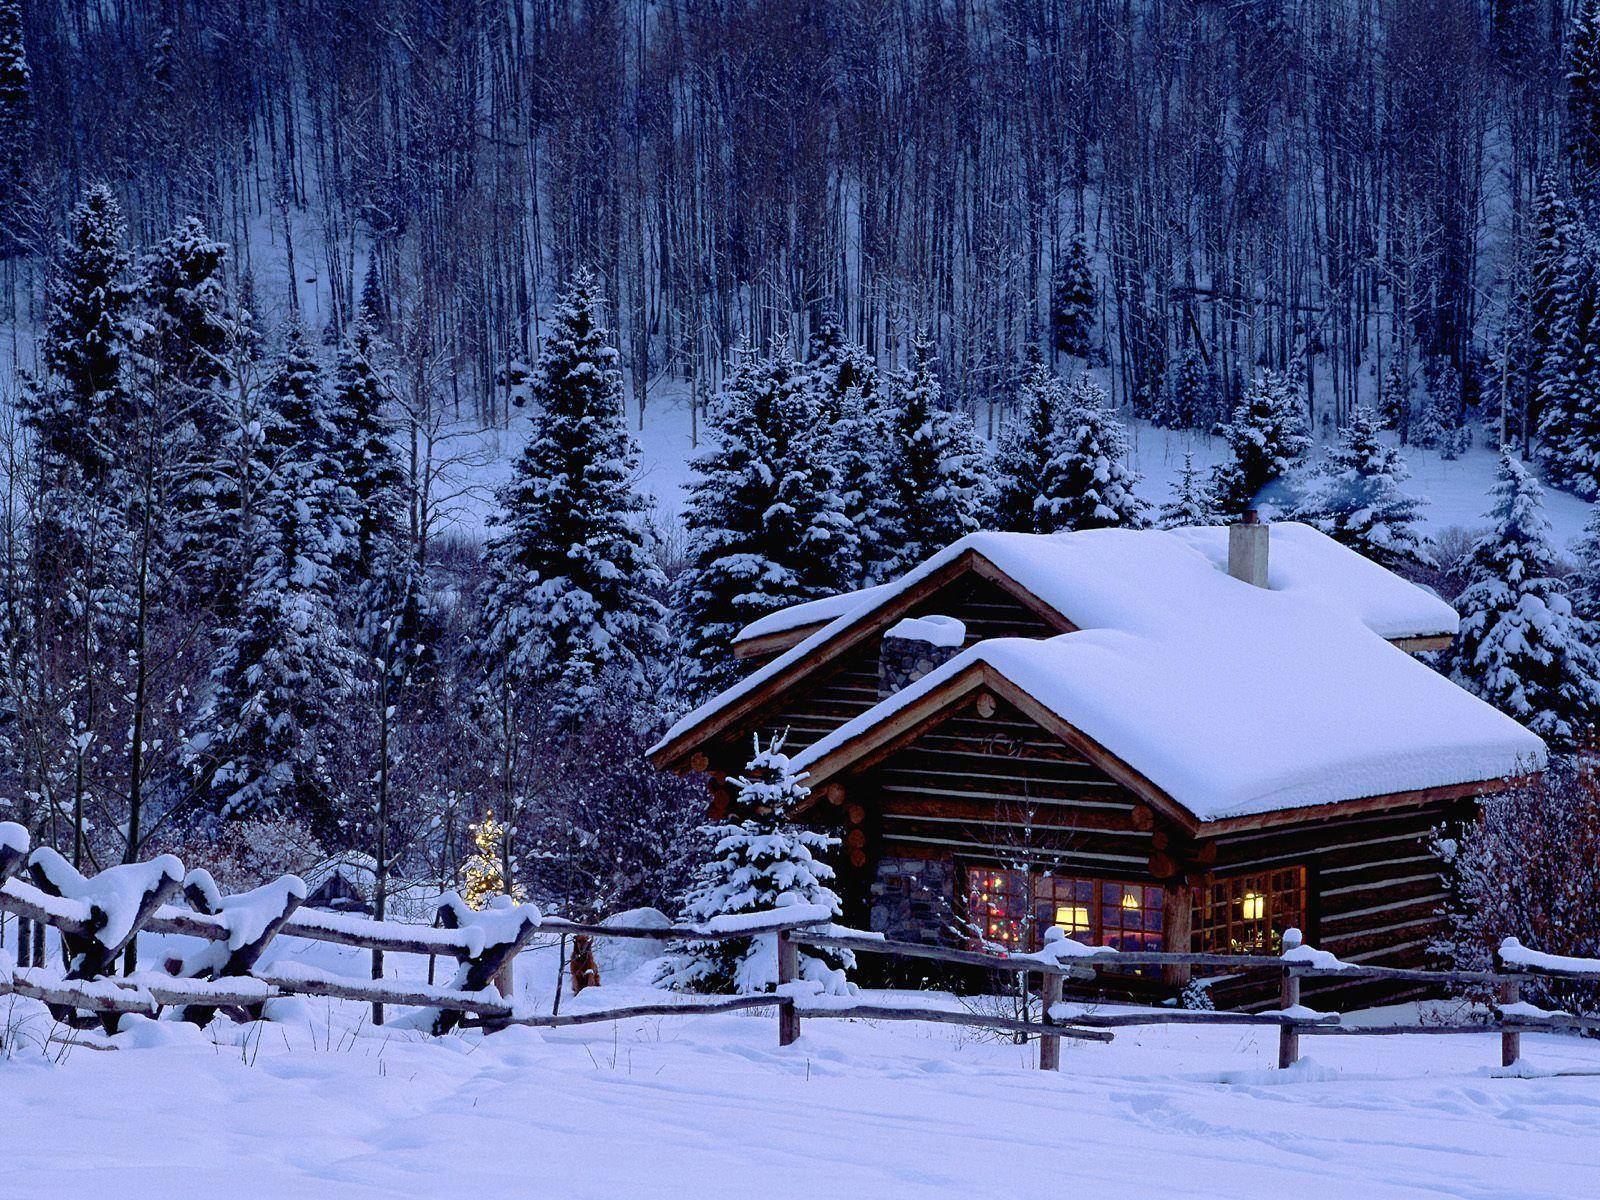 Old Aesthetic Christmas Snowy Cabins Wallpaper